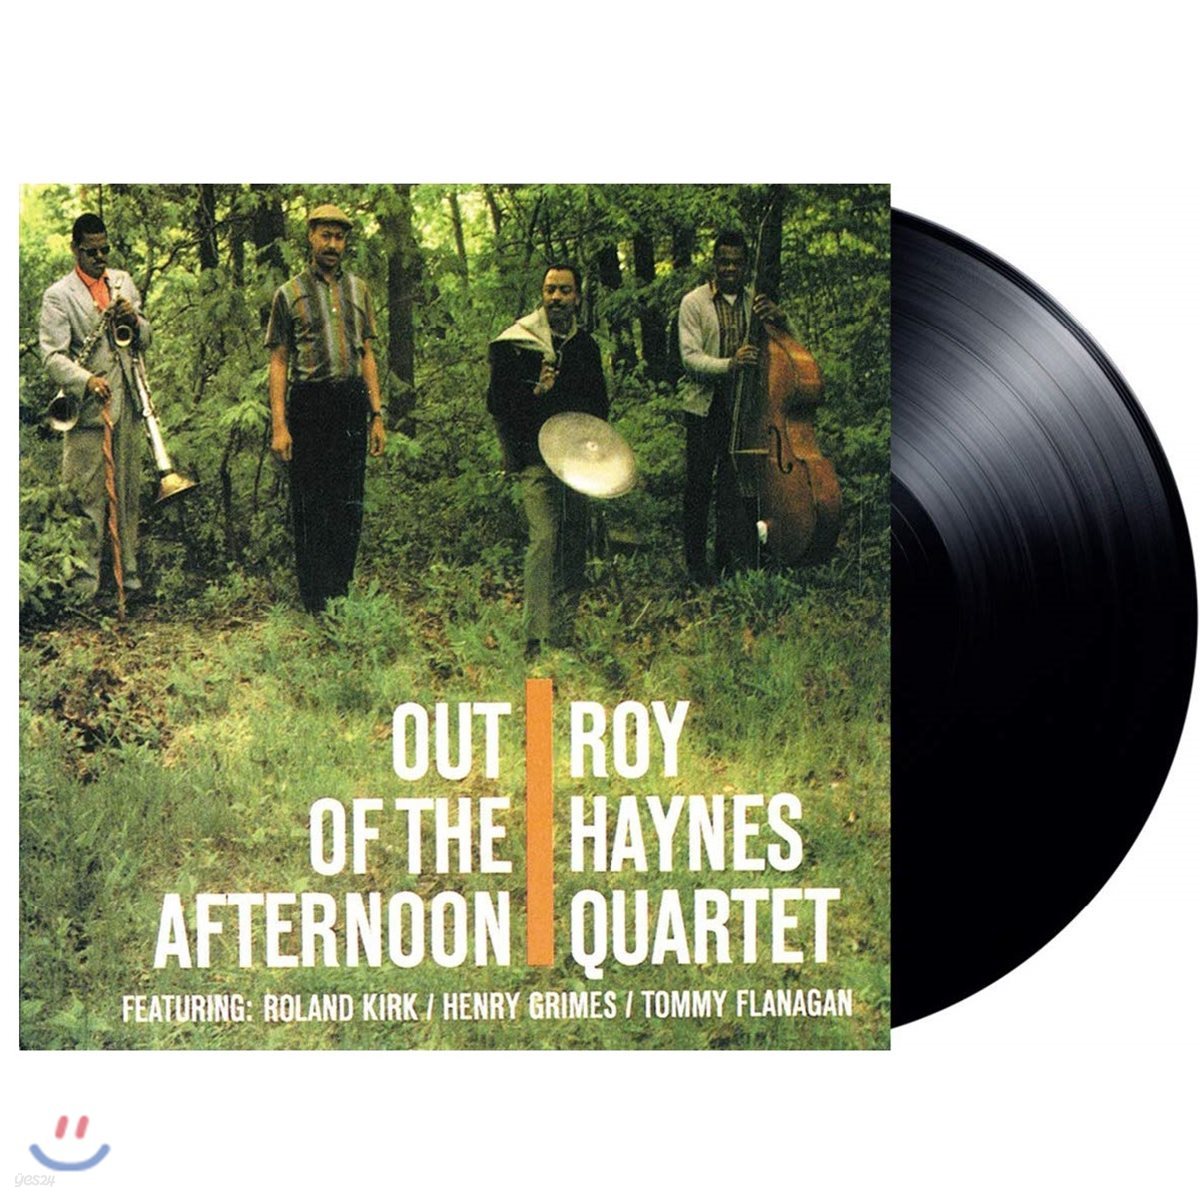 Roy Haynes Quartet (로이 헤인즈 쿼텟) - Out of the Afternoon [LP]